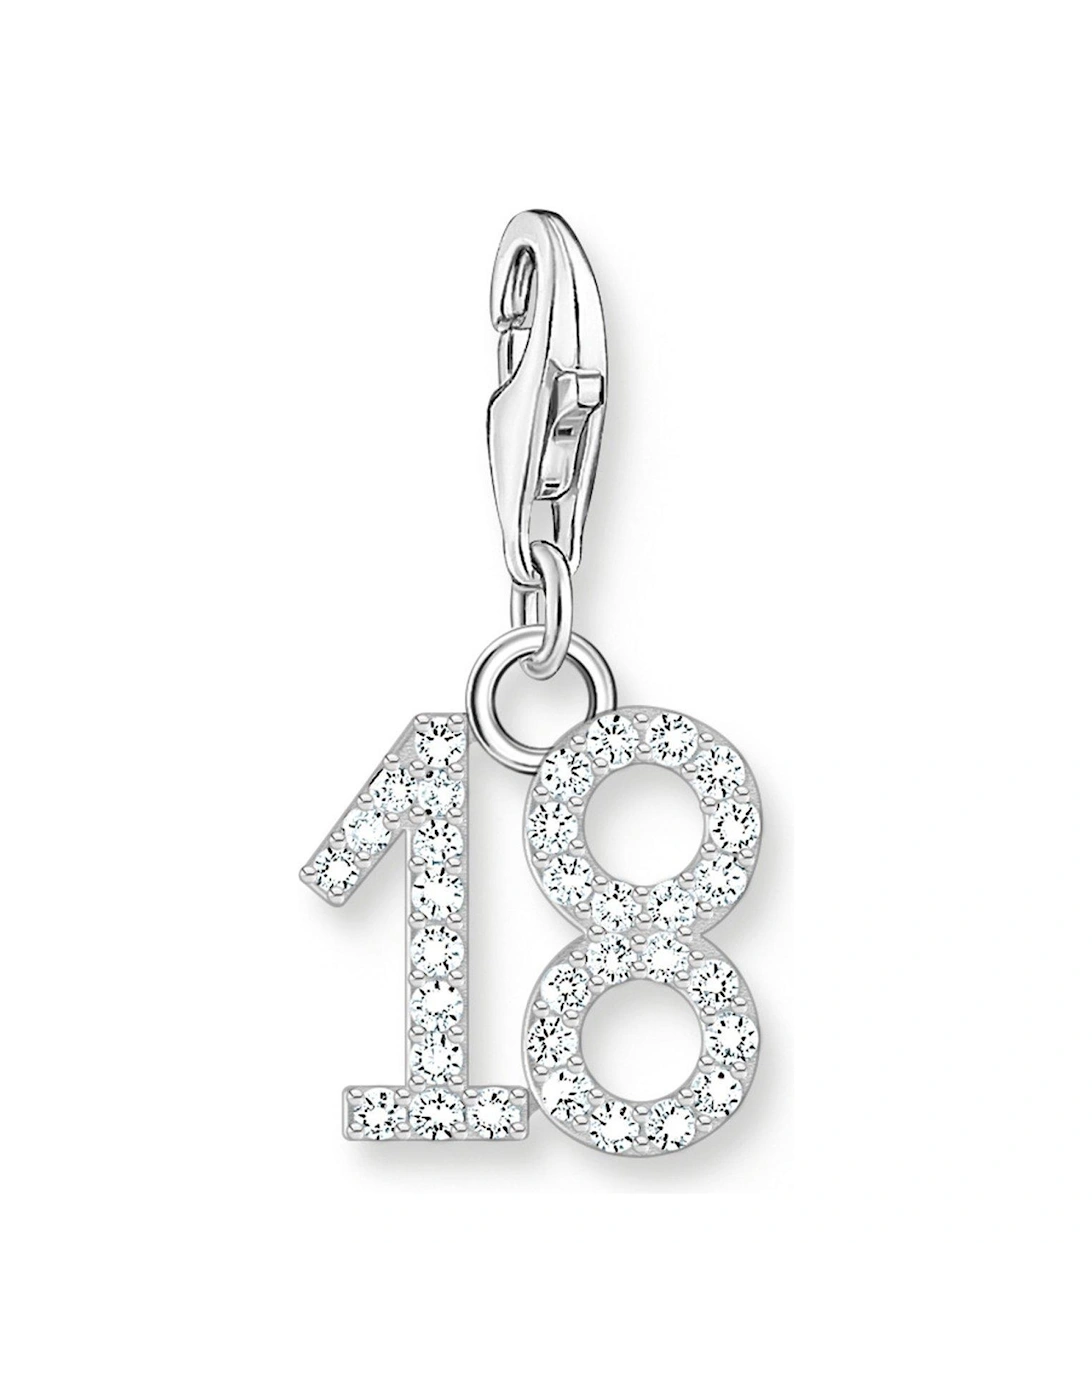 Charm Number 18 - 925 Silver and Zirconia, 2 of 1